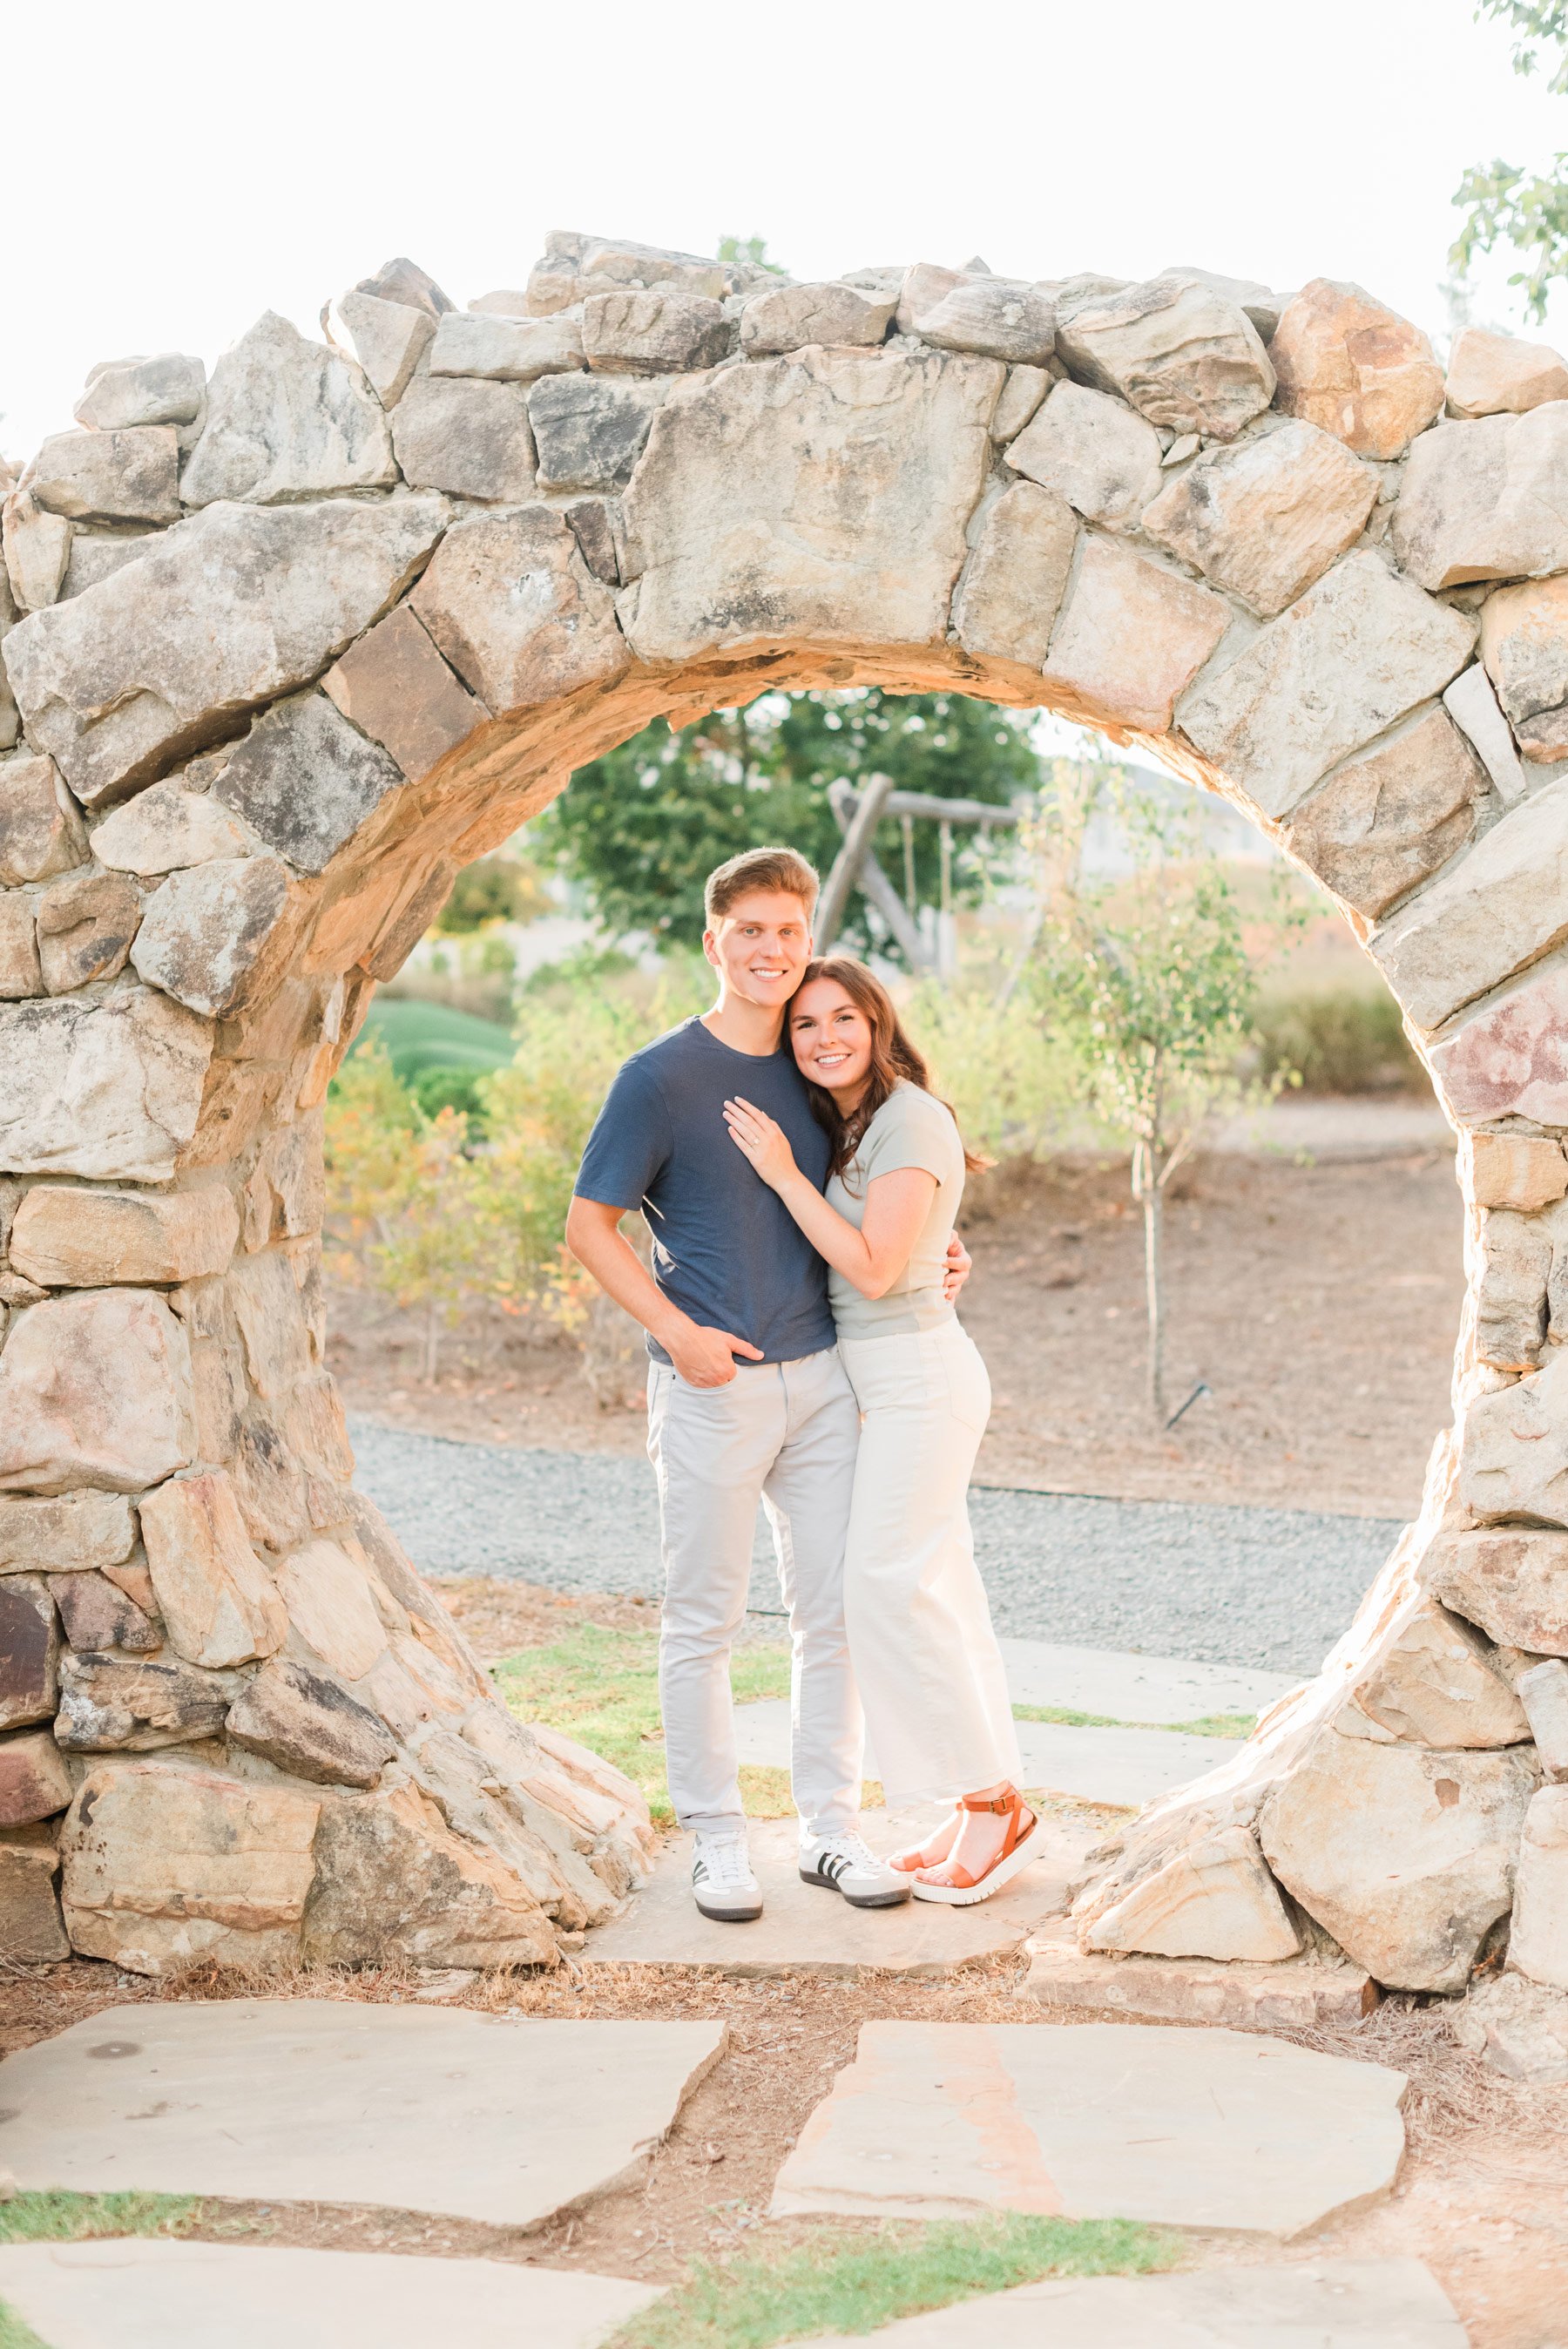    I love this unique archway in this Fayetteville, Georgia park. #trilithstudios #georgiaweddingphotographer #fayettevillephotographer #fayettevilleengagementphotos #outdoorengagements #formalengagementphotos #reasonstobookengagementphotos&nbsp;   